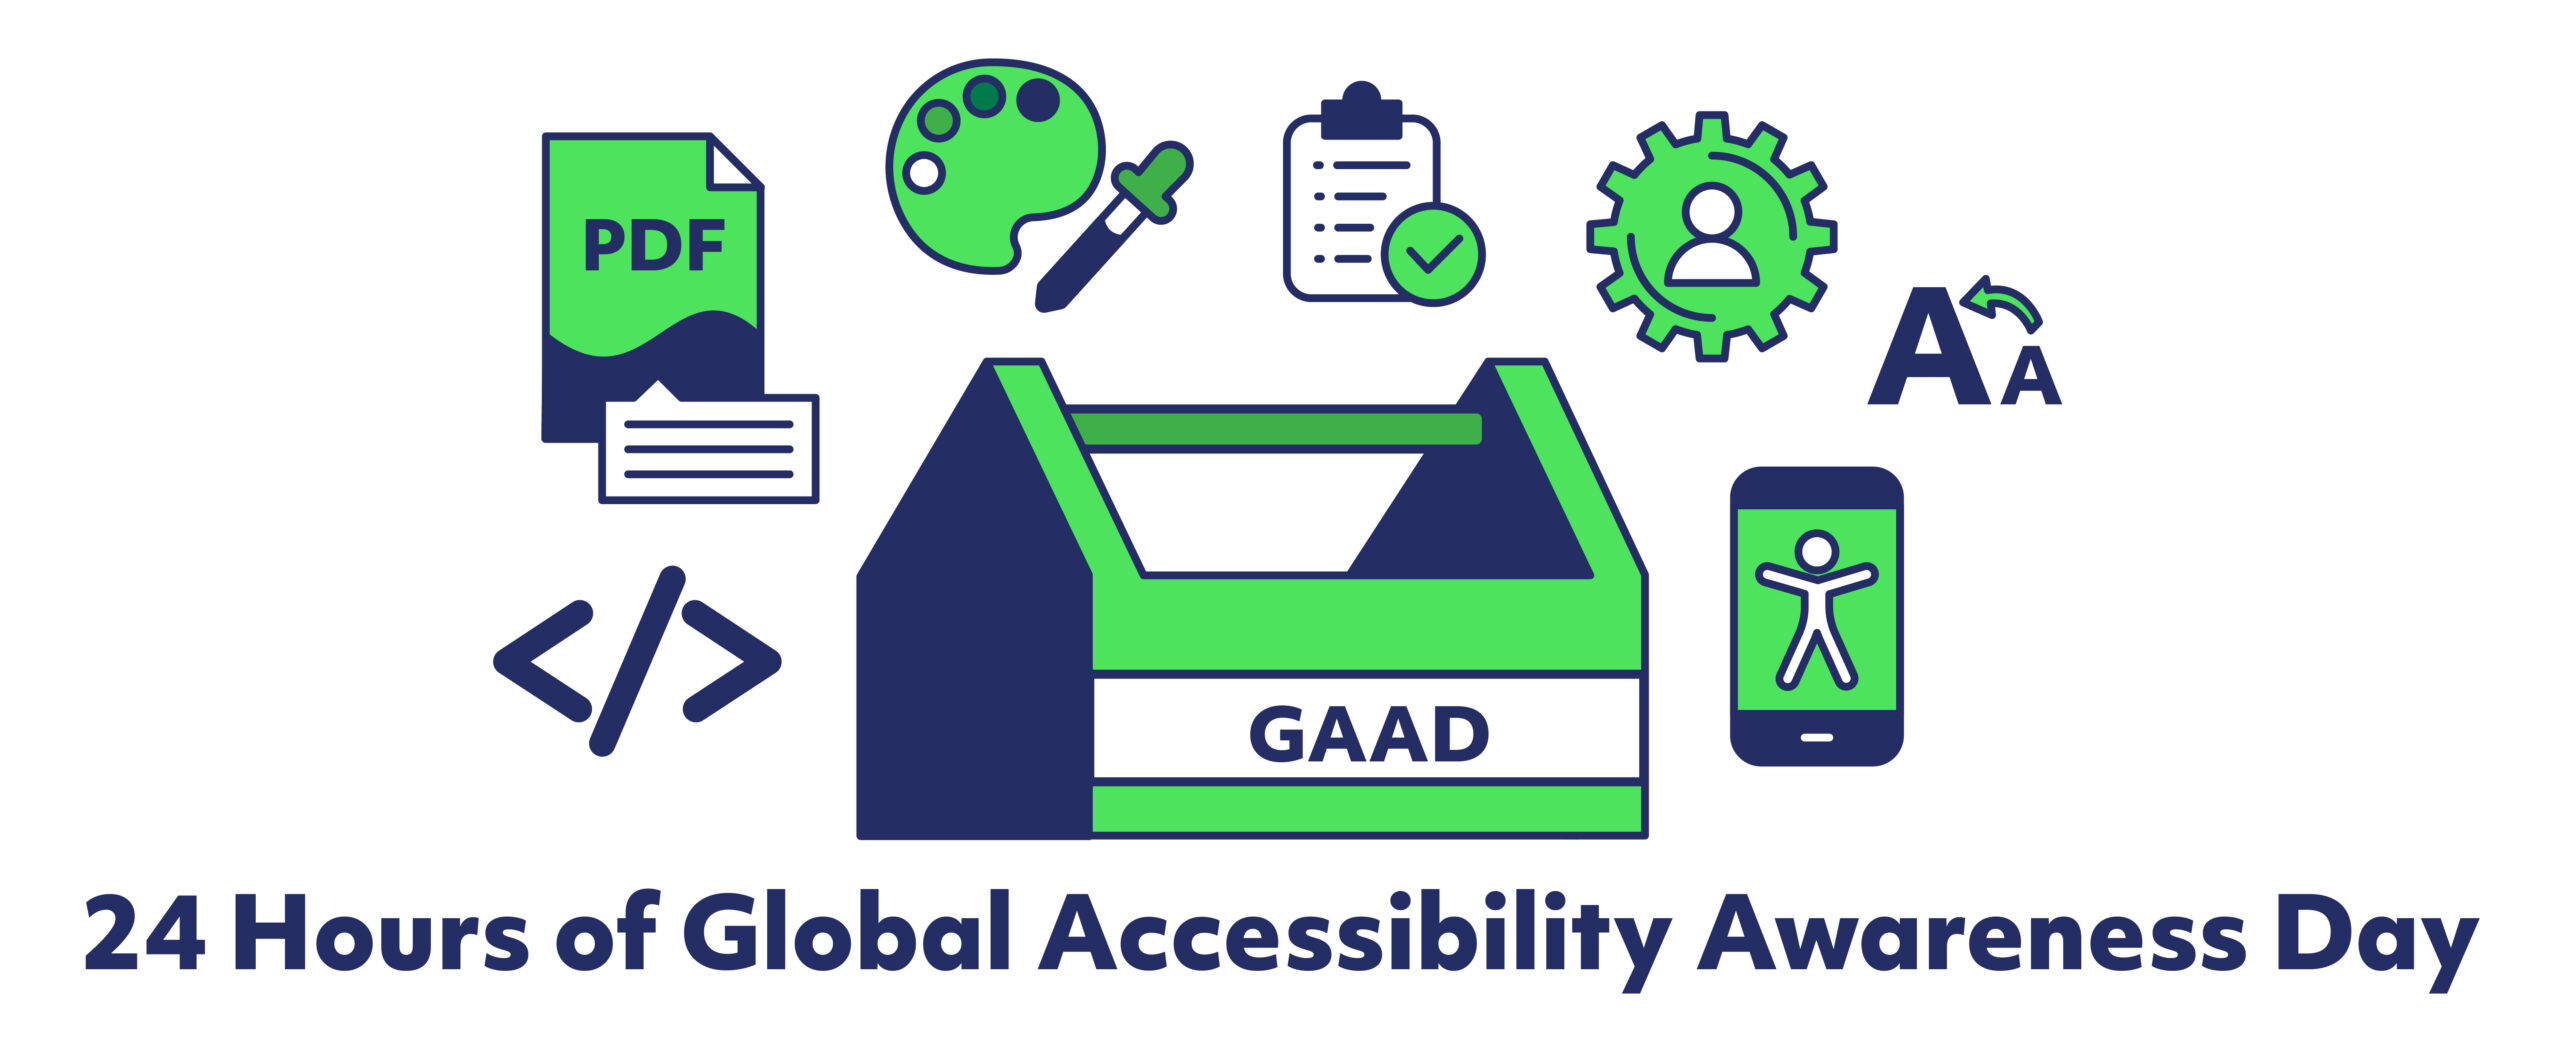 Our 24 Hours of GAAD Retrospective